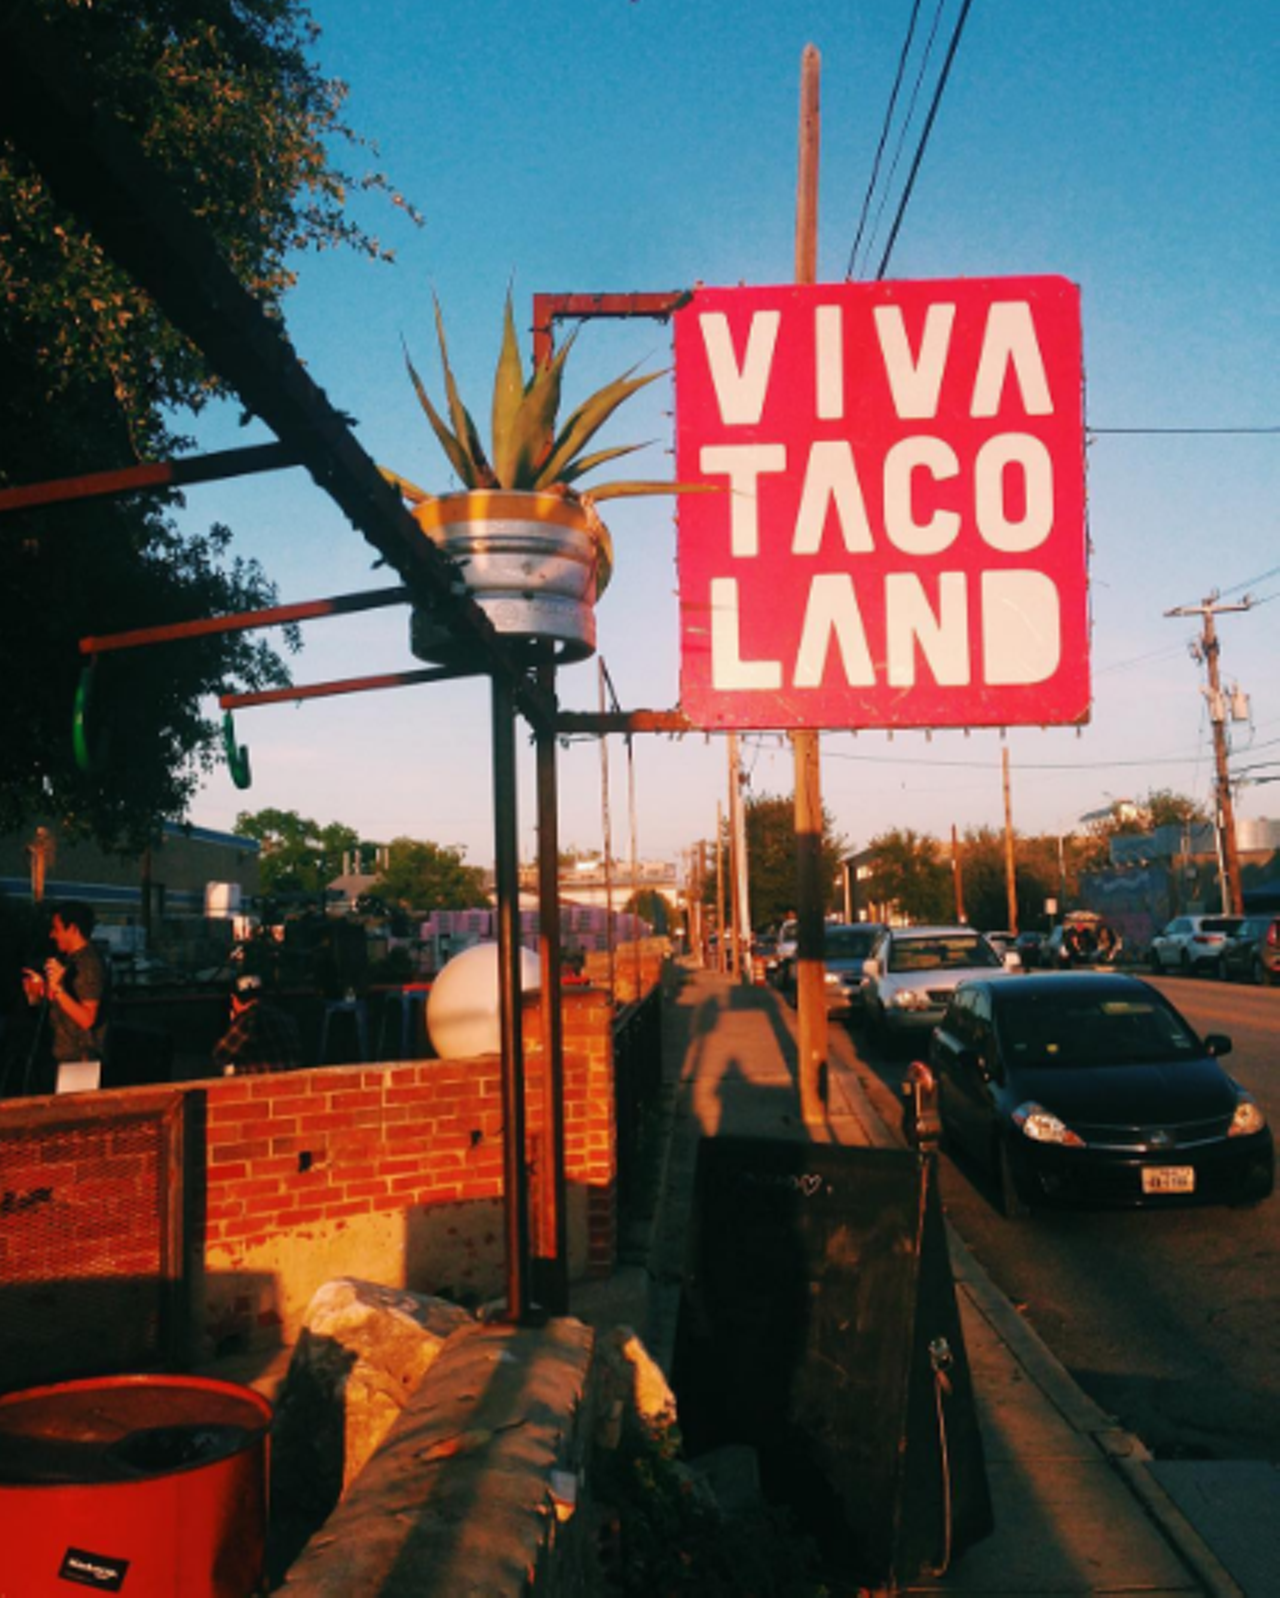 "The new Taco Land is so much better than the old one."Said no one ever.
Photo via Instagram, http.sidney